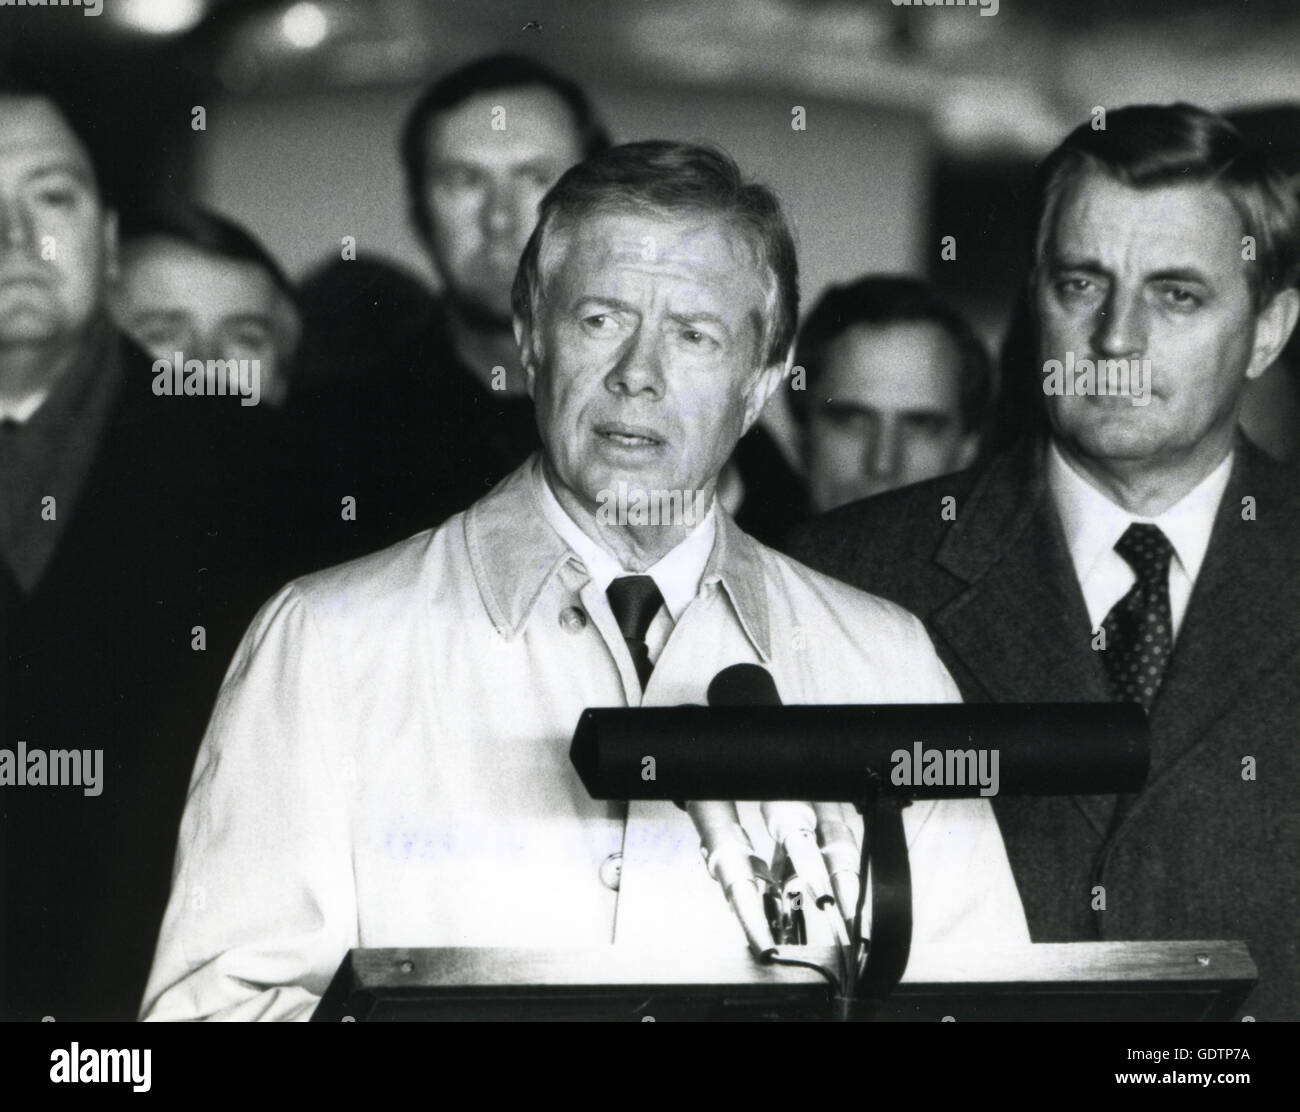 The 52 freed hostages, after their release from Iran, and former Vice-President Walter Mondale listen as Former President Jimmy Carter speaks to a crowd. Stock Photo